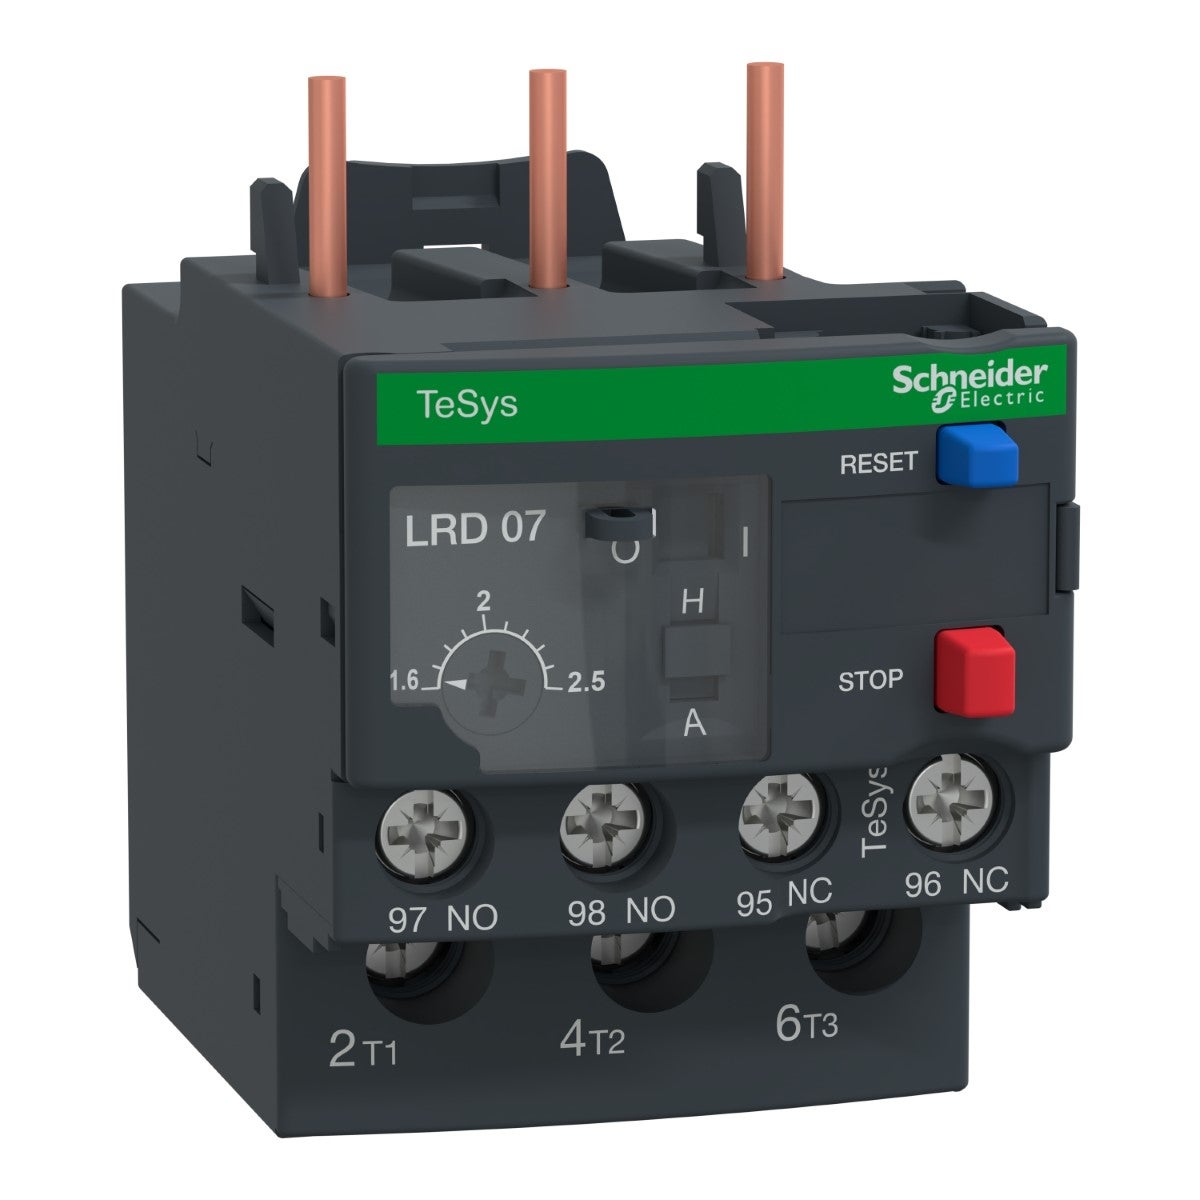 Thermal overload relay,TeSys Deca,1.6-2.5A,1NO+1NC,class 10A,lugs terminal,for unbalanced loads